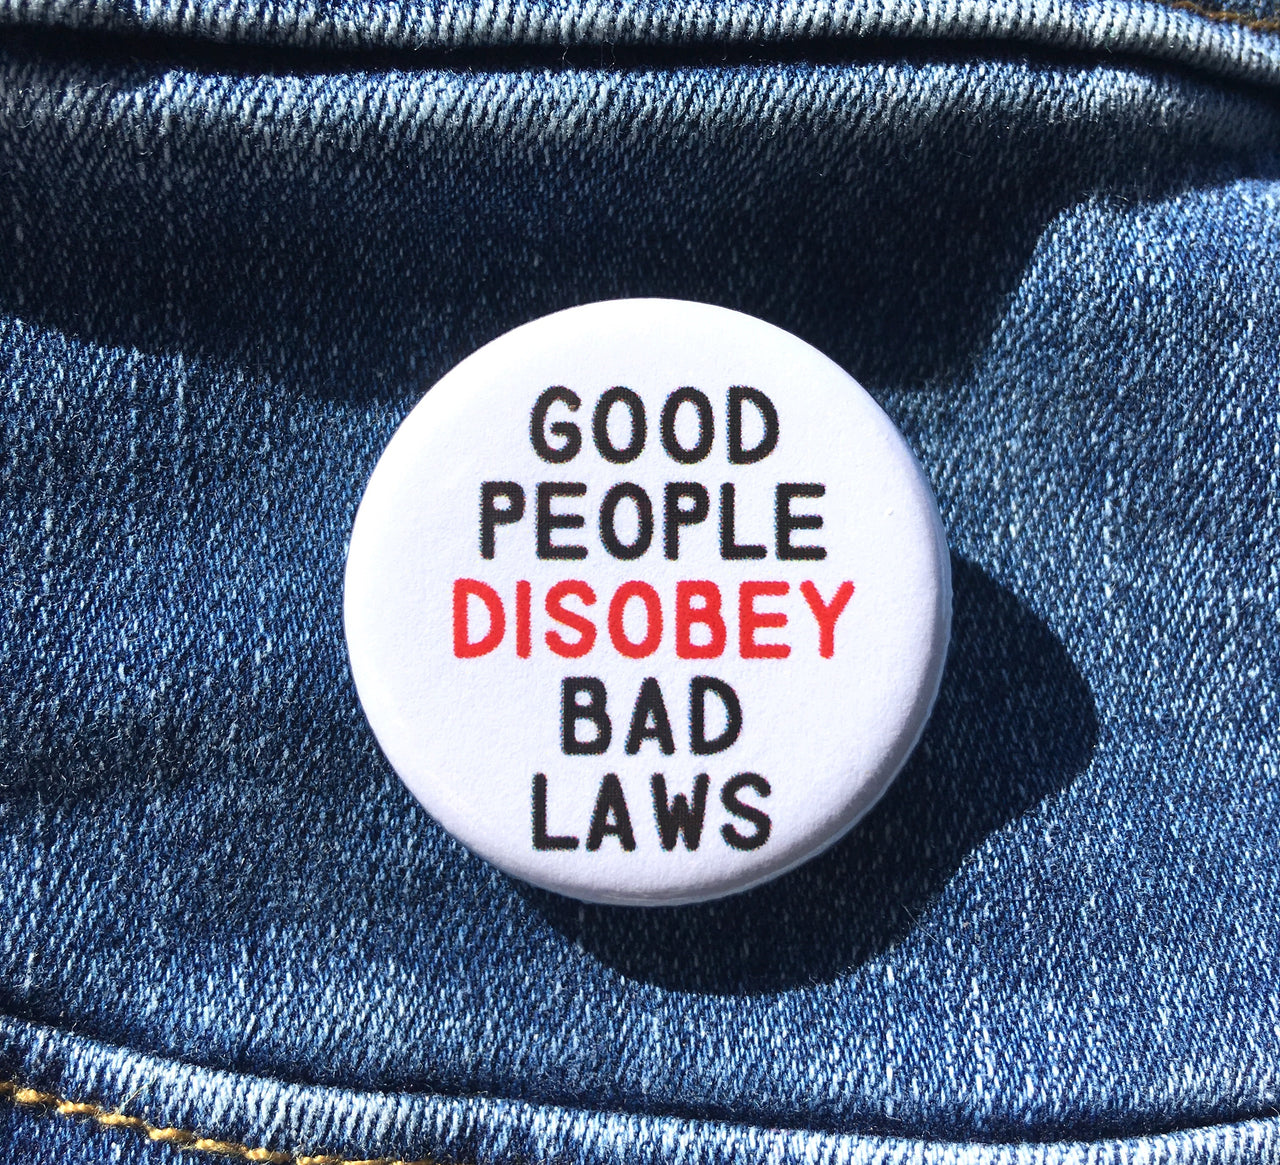 Good people disobey bad laws - Radical Buttons